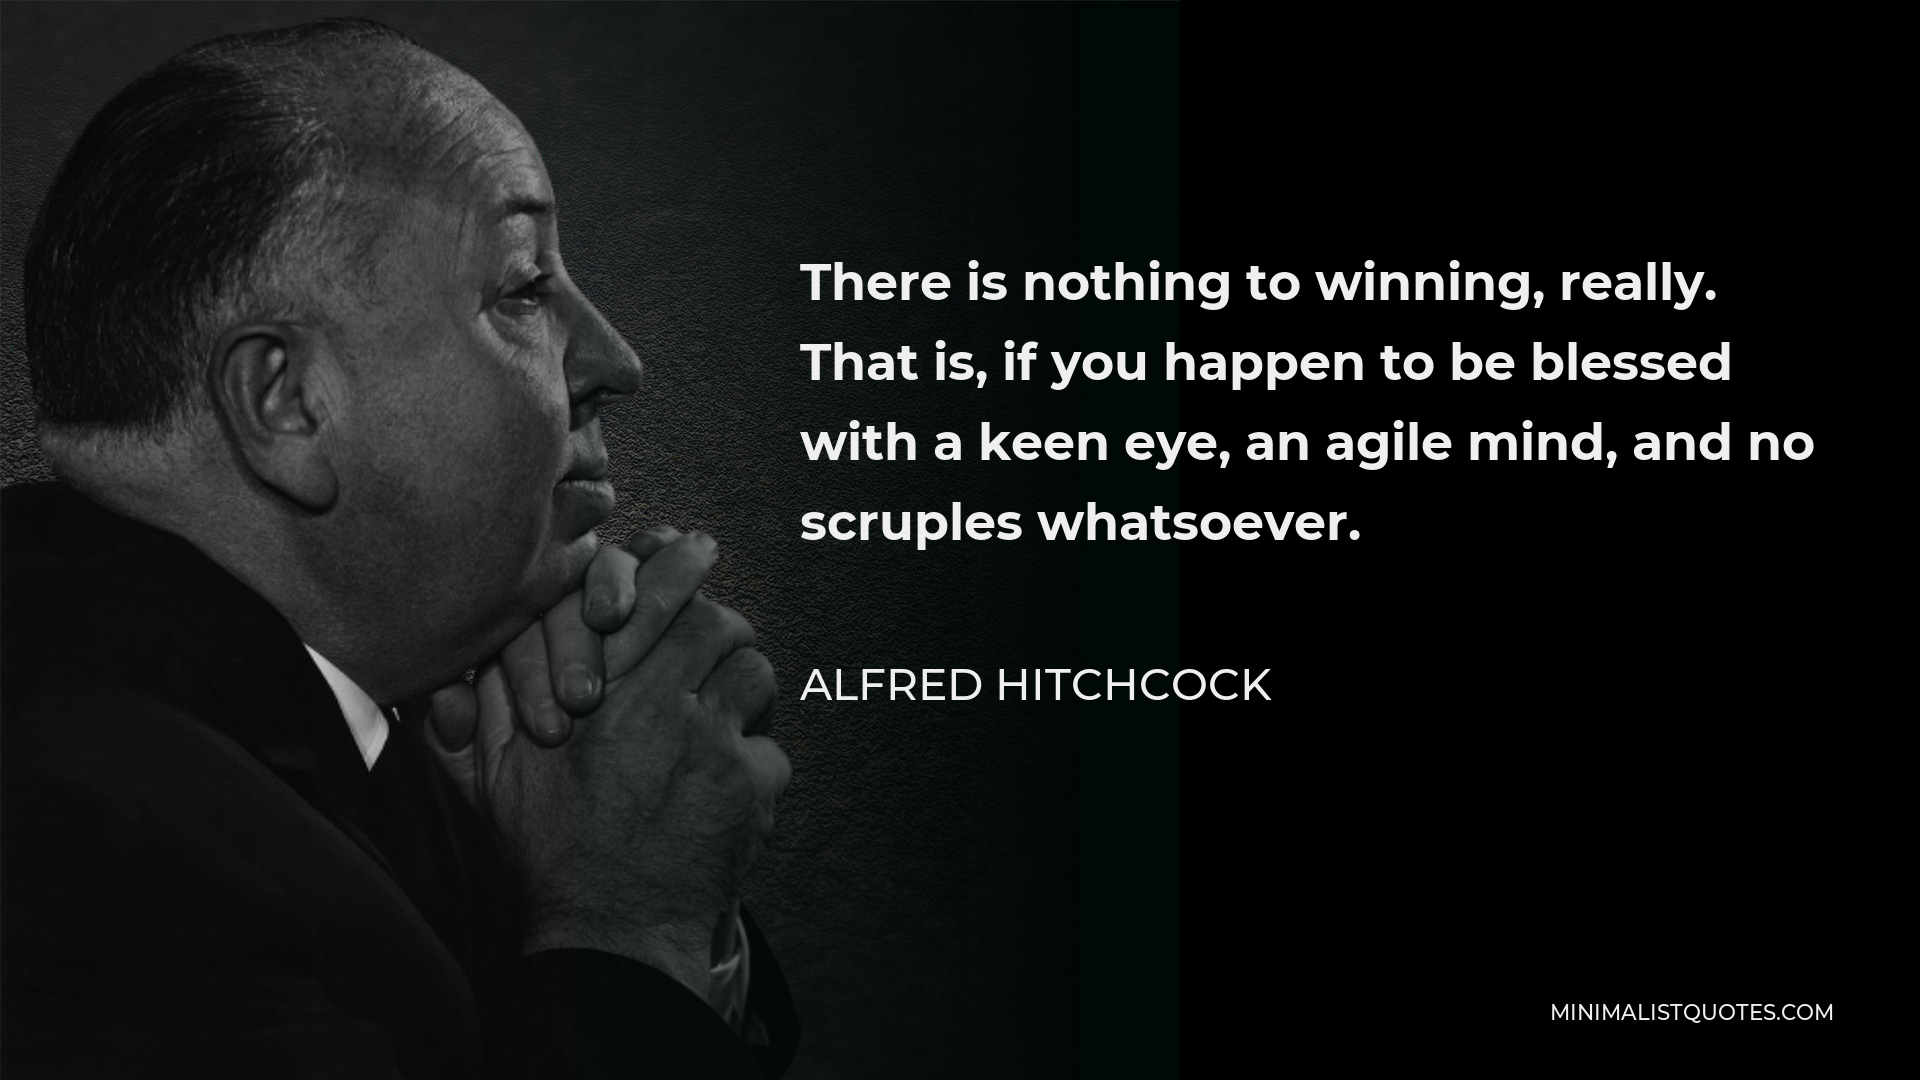 Alfred Hitchcock Quote: There is nothing to winning, really. That is, if  you happen to be blessed with a keen eye, an agile mind, and no scruples  whatsoever.